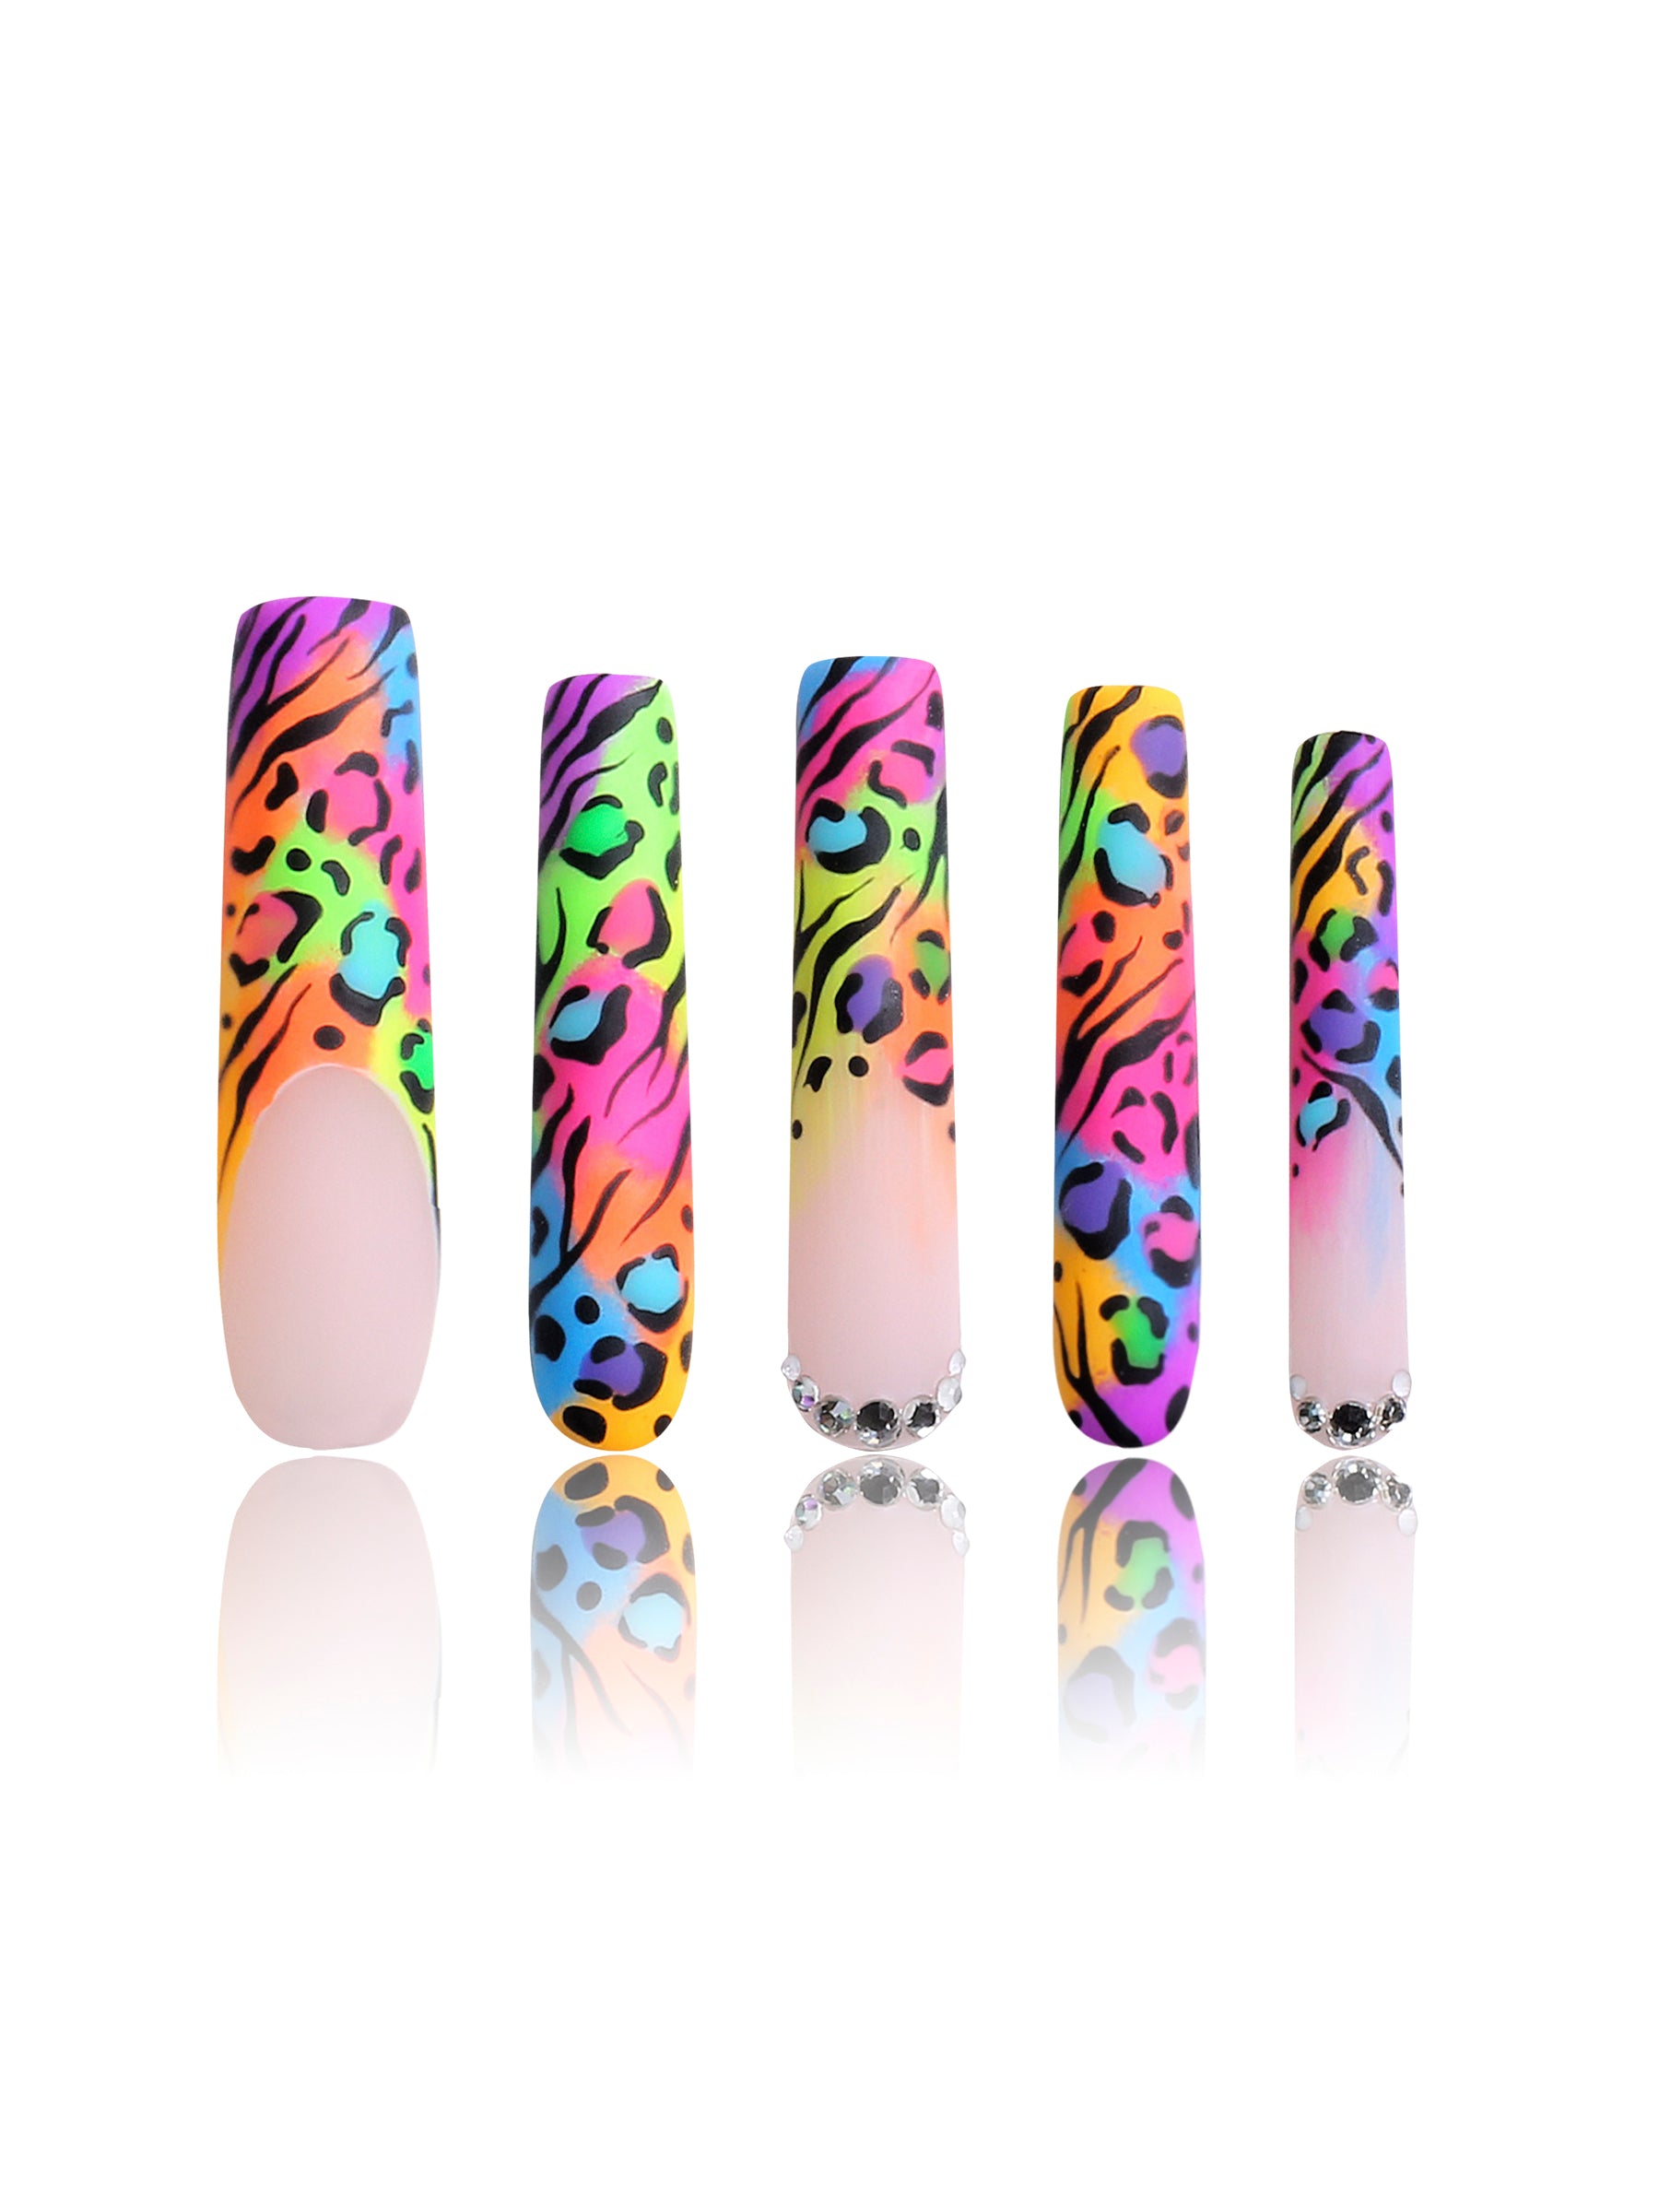 Colorful French tip illusion press-on acrylic nails with bold leopard prints and rhinestones in varying sizes